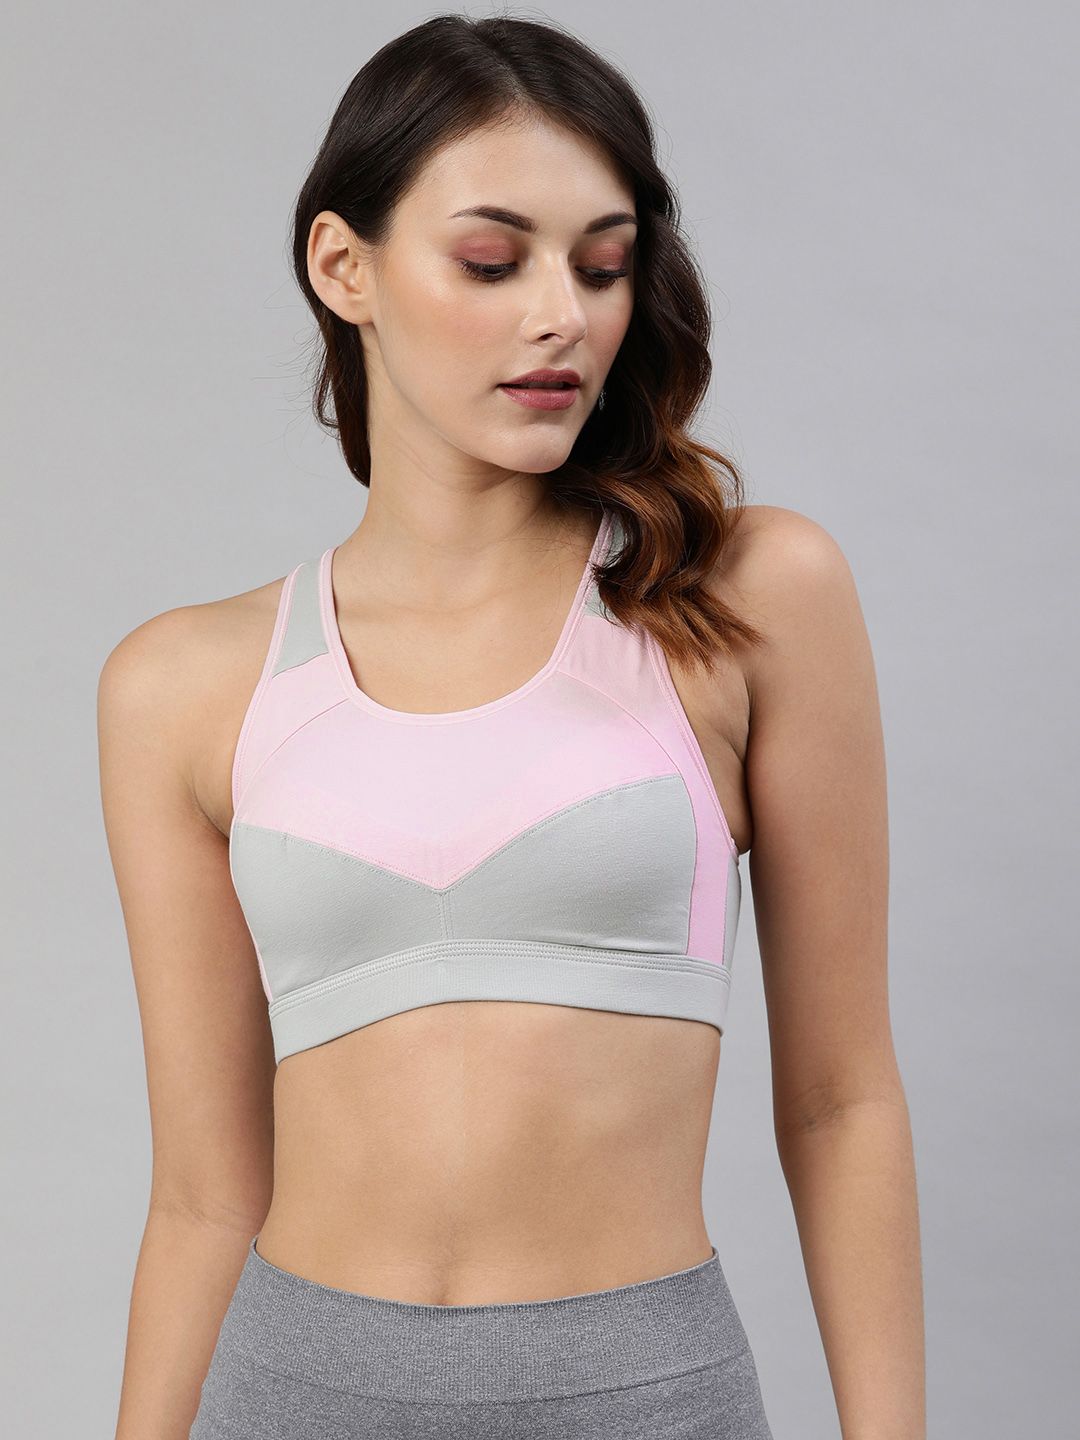 Van Heusen Grey & Pink Colourblocked Non-Wired Lightly Padded Workout Bra Price in India